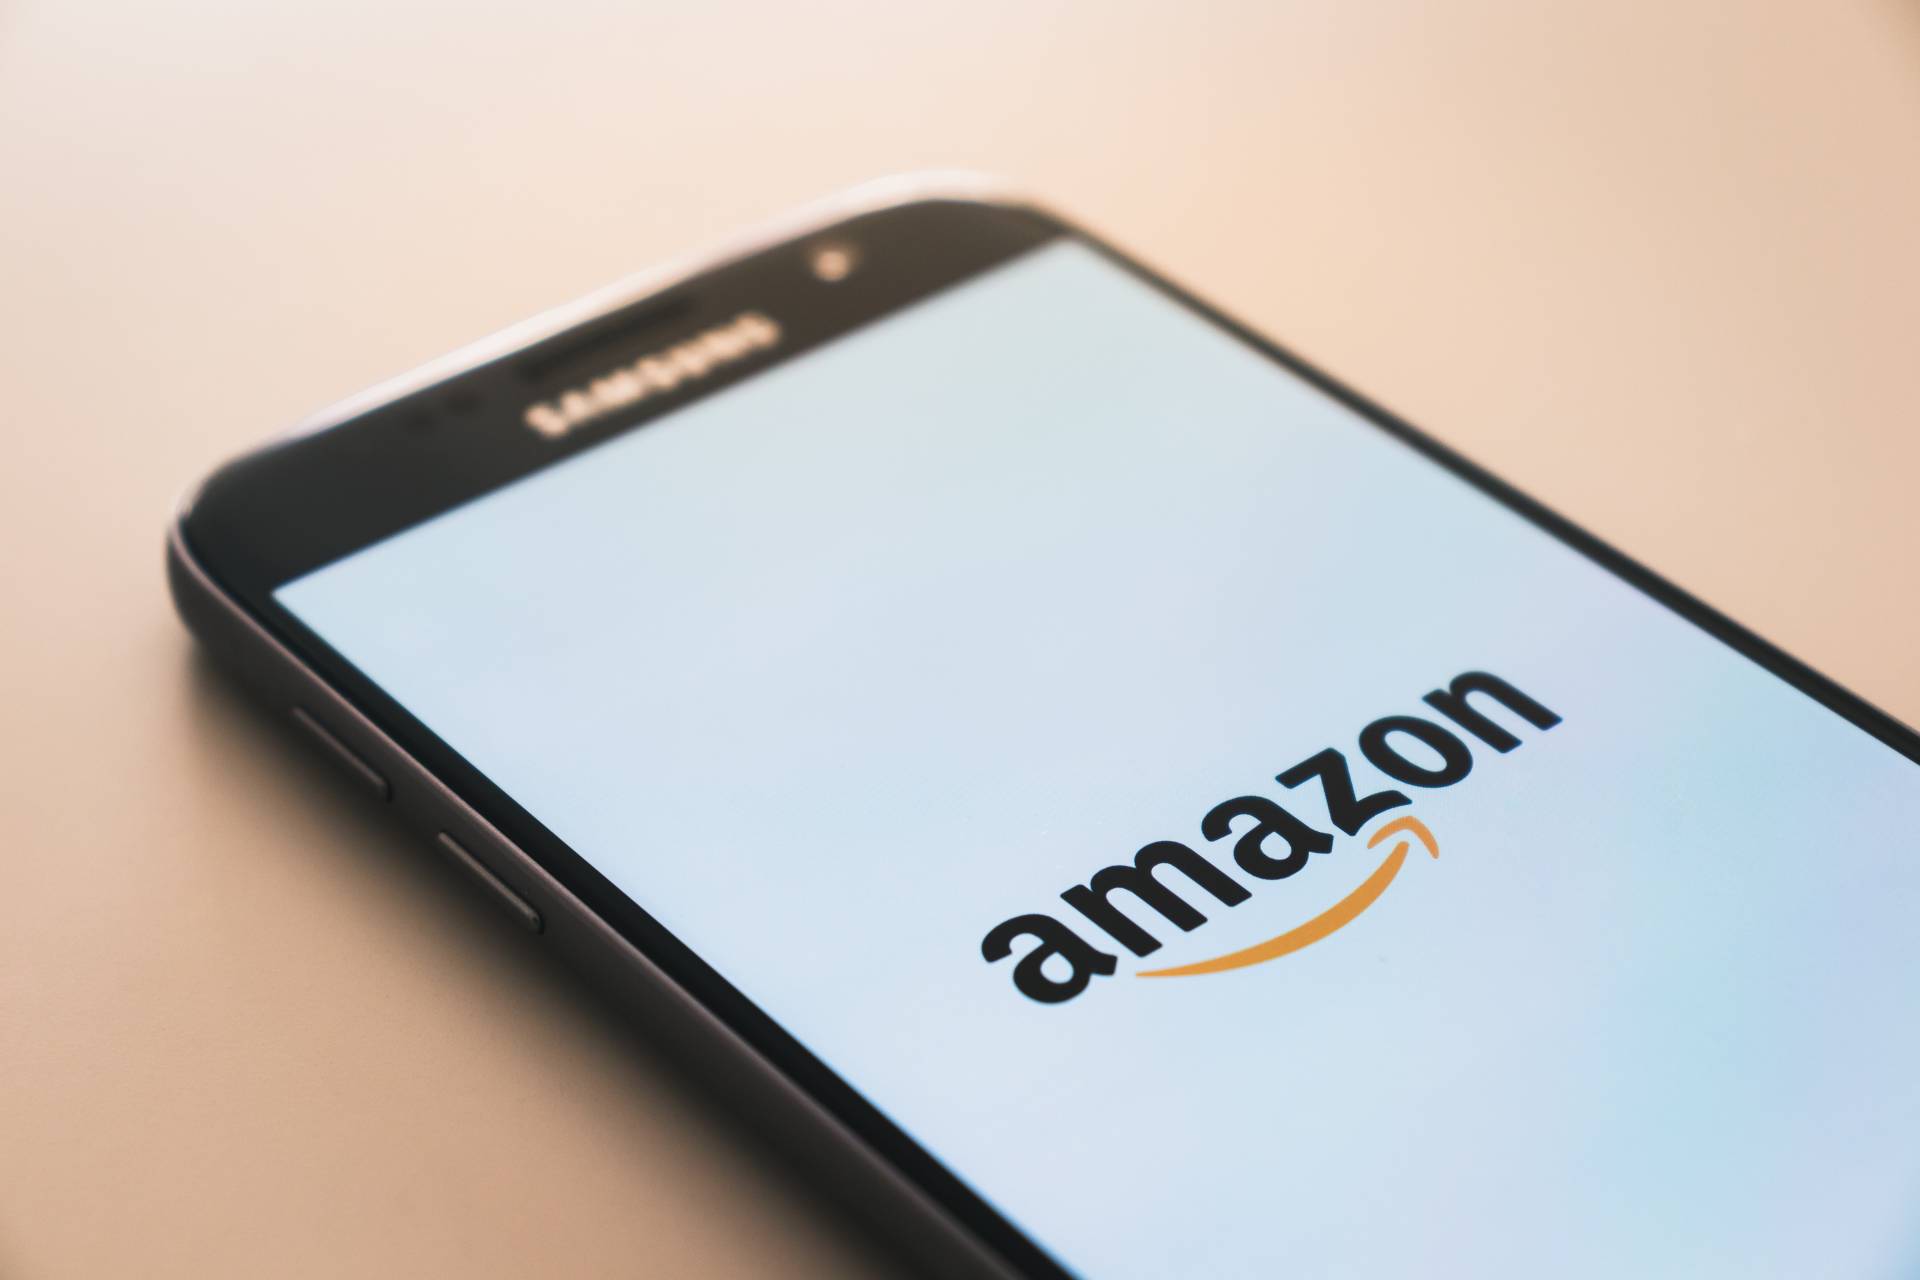 Amazon's Impending FTC Antitrust Suit Signals a Turning Point for Online Marketplace Dominance